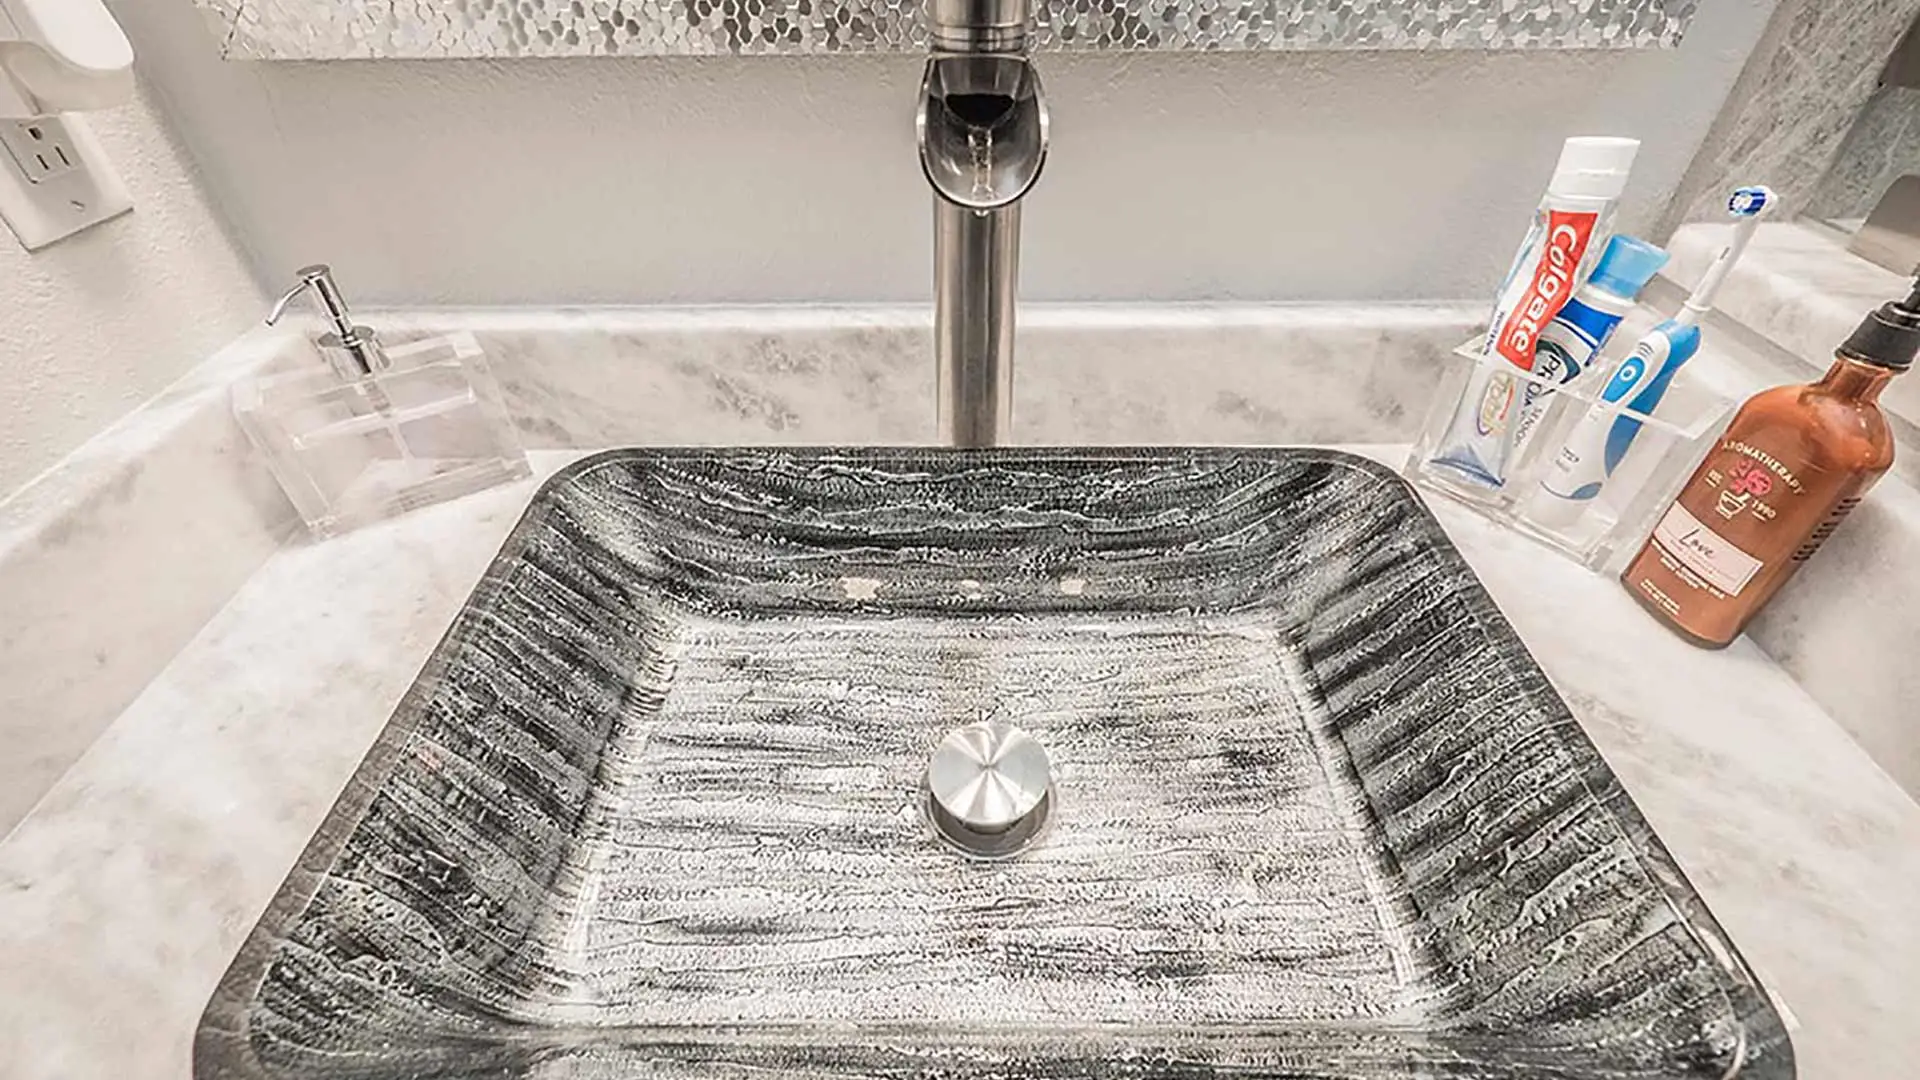 Choosing the Right Sink for Your Bathroom Remodel